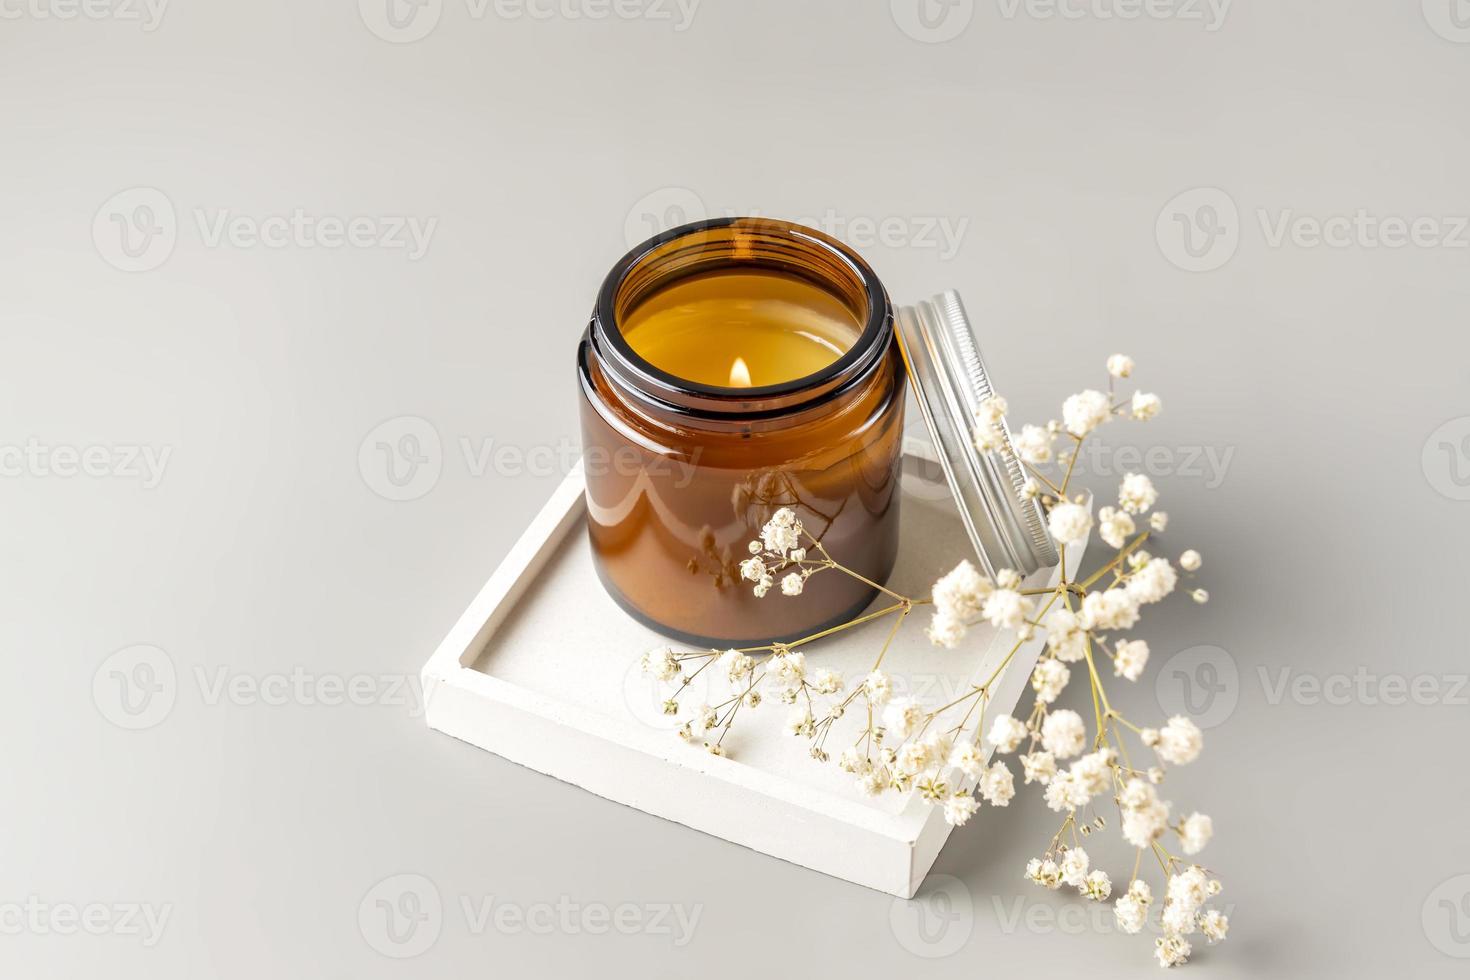 Luxurious white tray decoration, home interior decor with burning aroma candle with white dry flowers photo